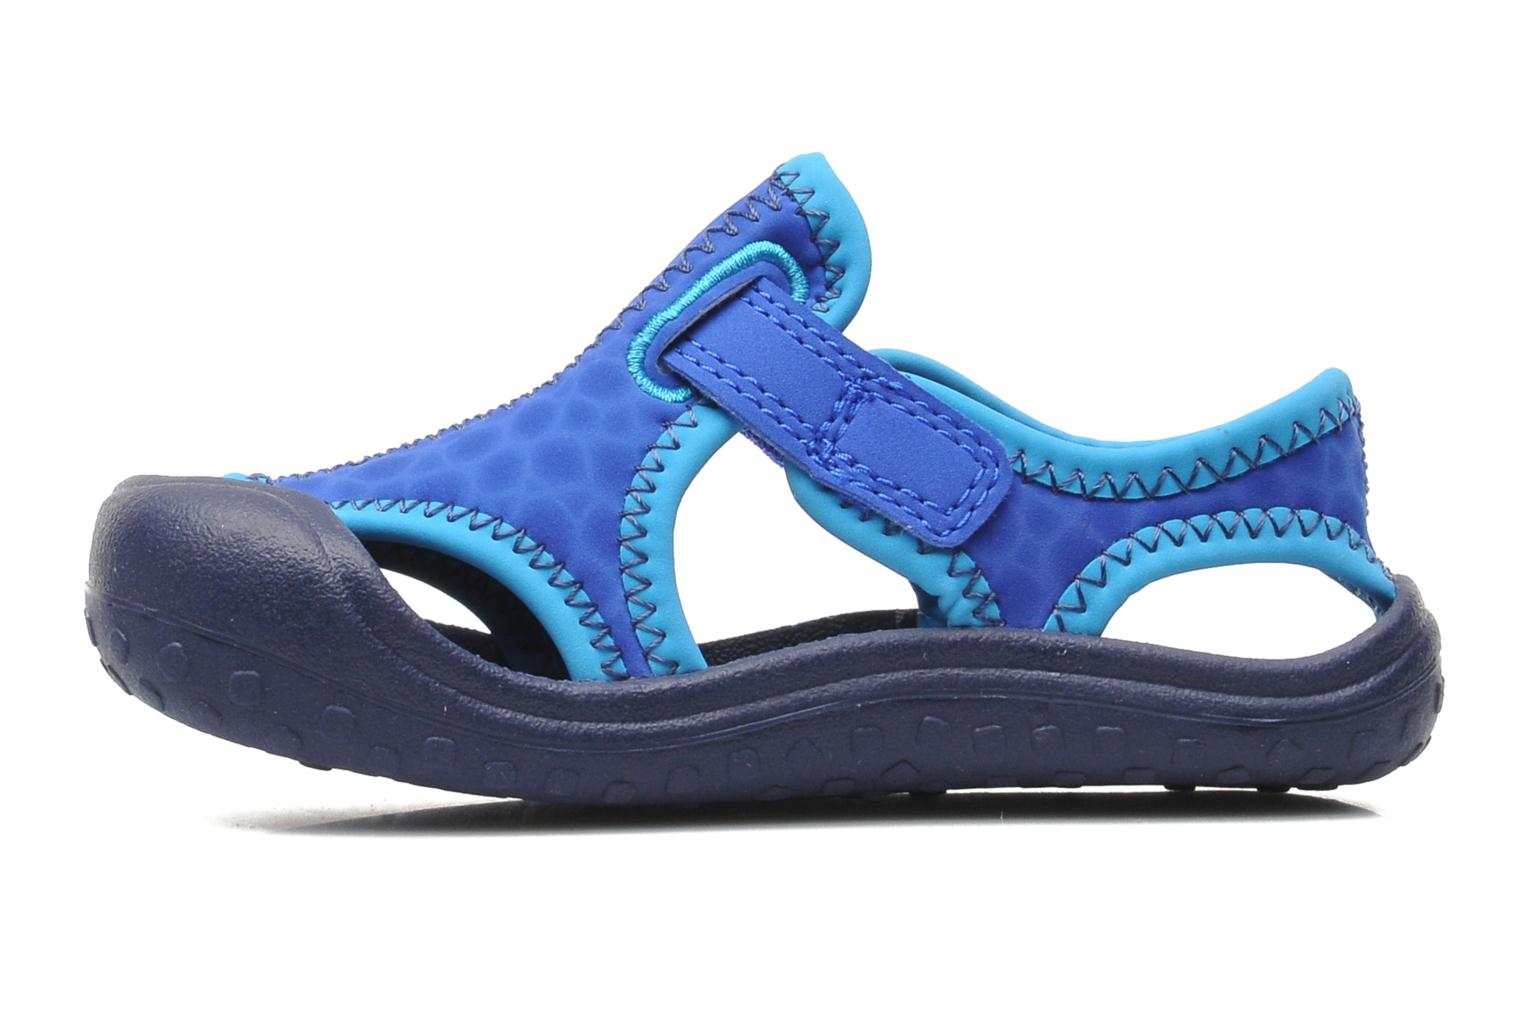 Nike SUNRAY PROTECT (TD) Sport shoes in Blue at Sarenza.co.uk (219187)